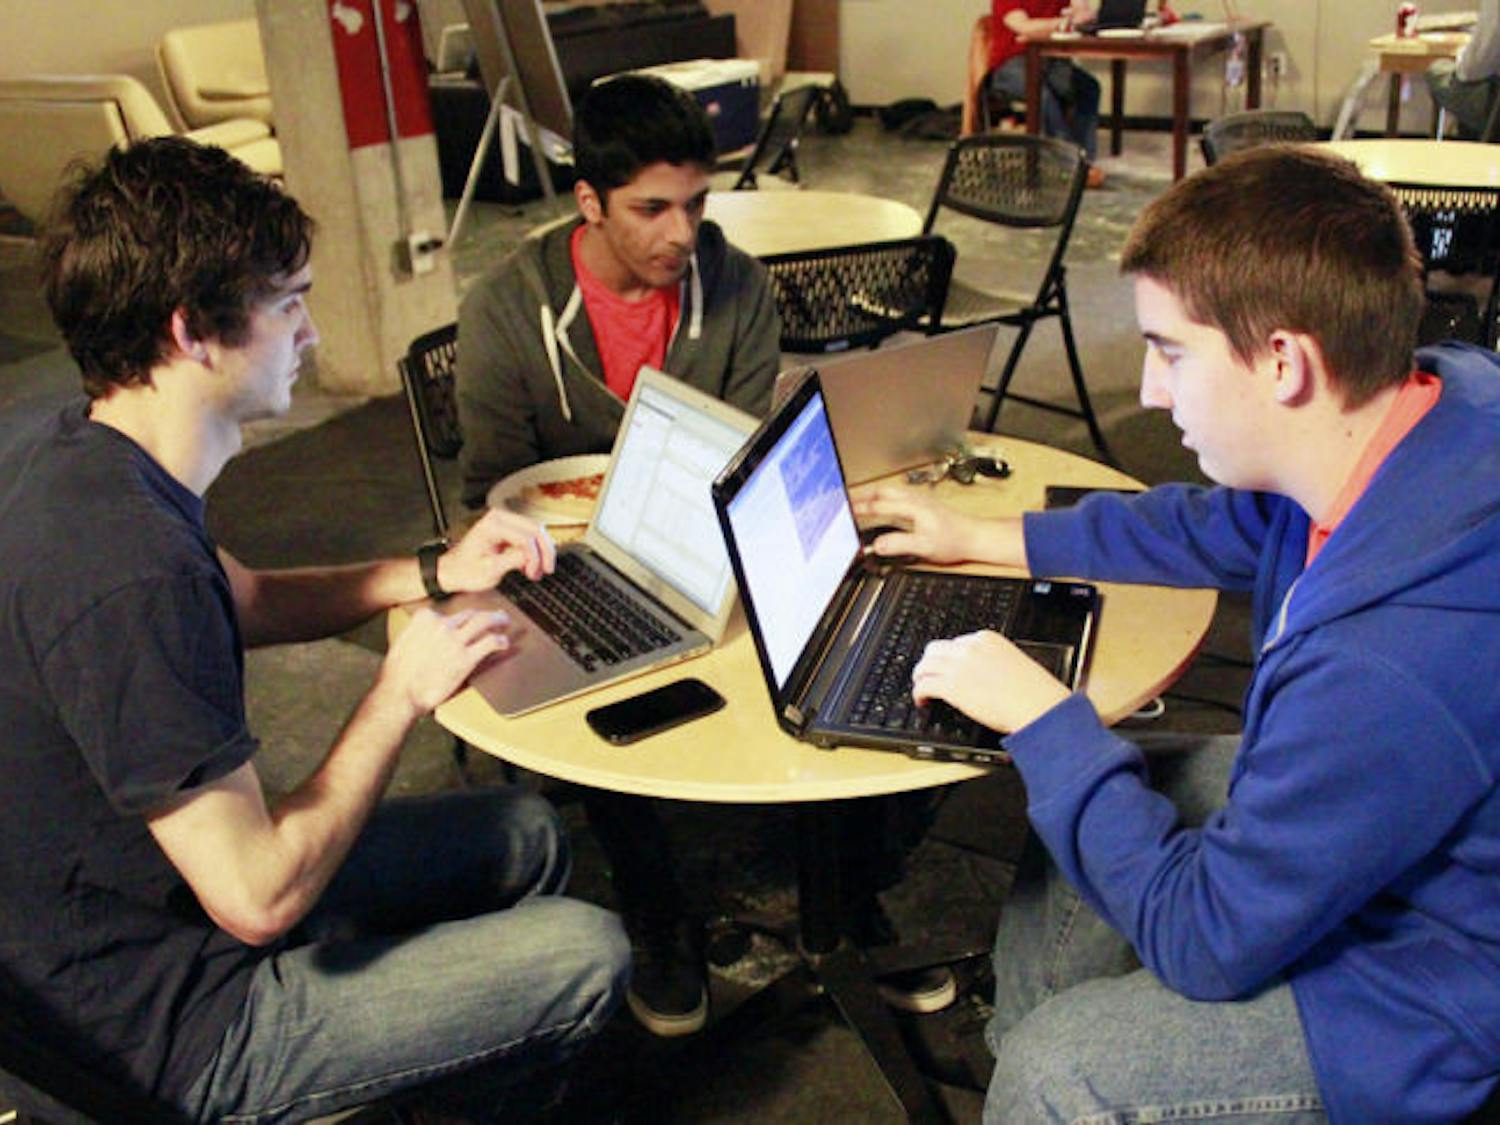 Joe Furlott, 20, Shyamal Patel, 21, and Derek Brown, 21, a group of UF computer sciences juniors work on an Android application during Hackathon, a 24-hour event at Hackerspace on Saturday. Participants worked for a shot to win $500.